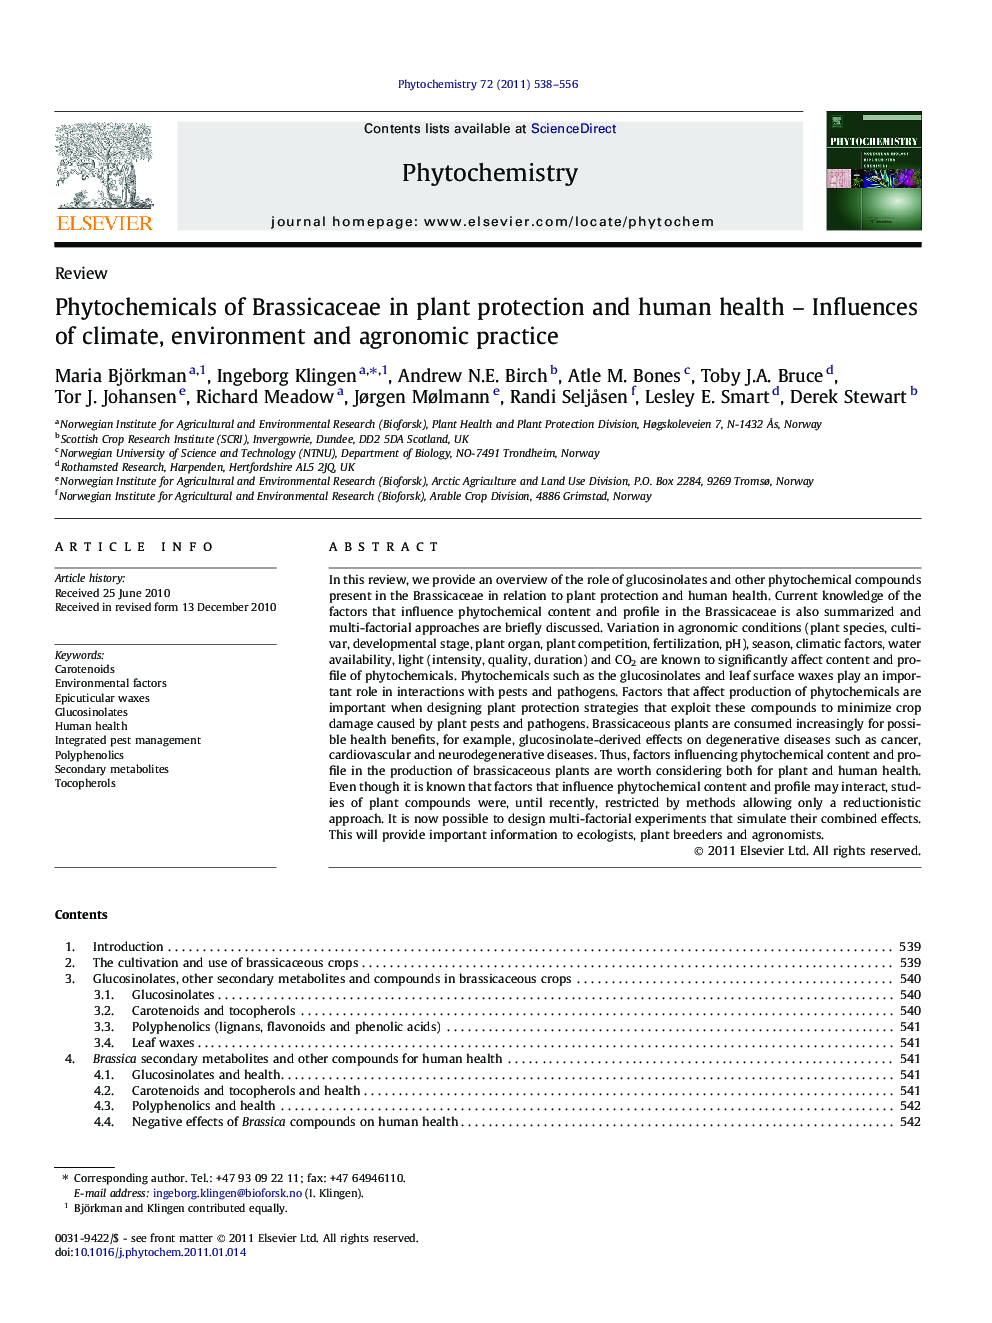 Phytochemicals of Brassicaceae in plant protection and human health - Influences of climate, environment and agronomic practice